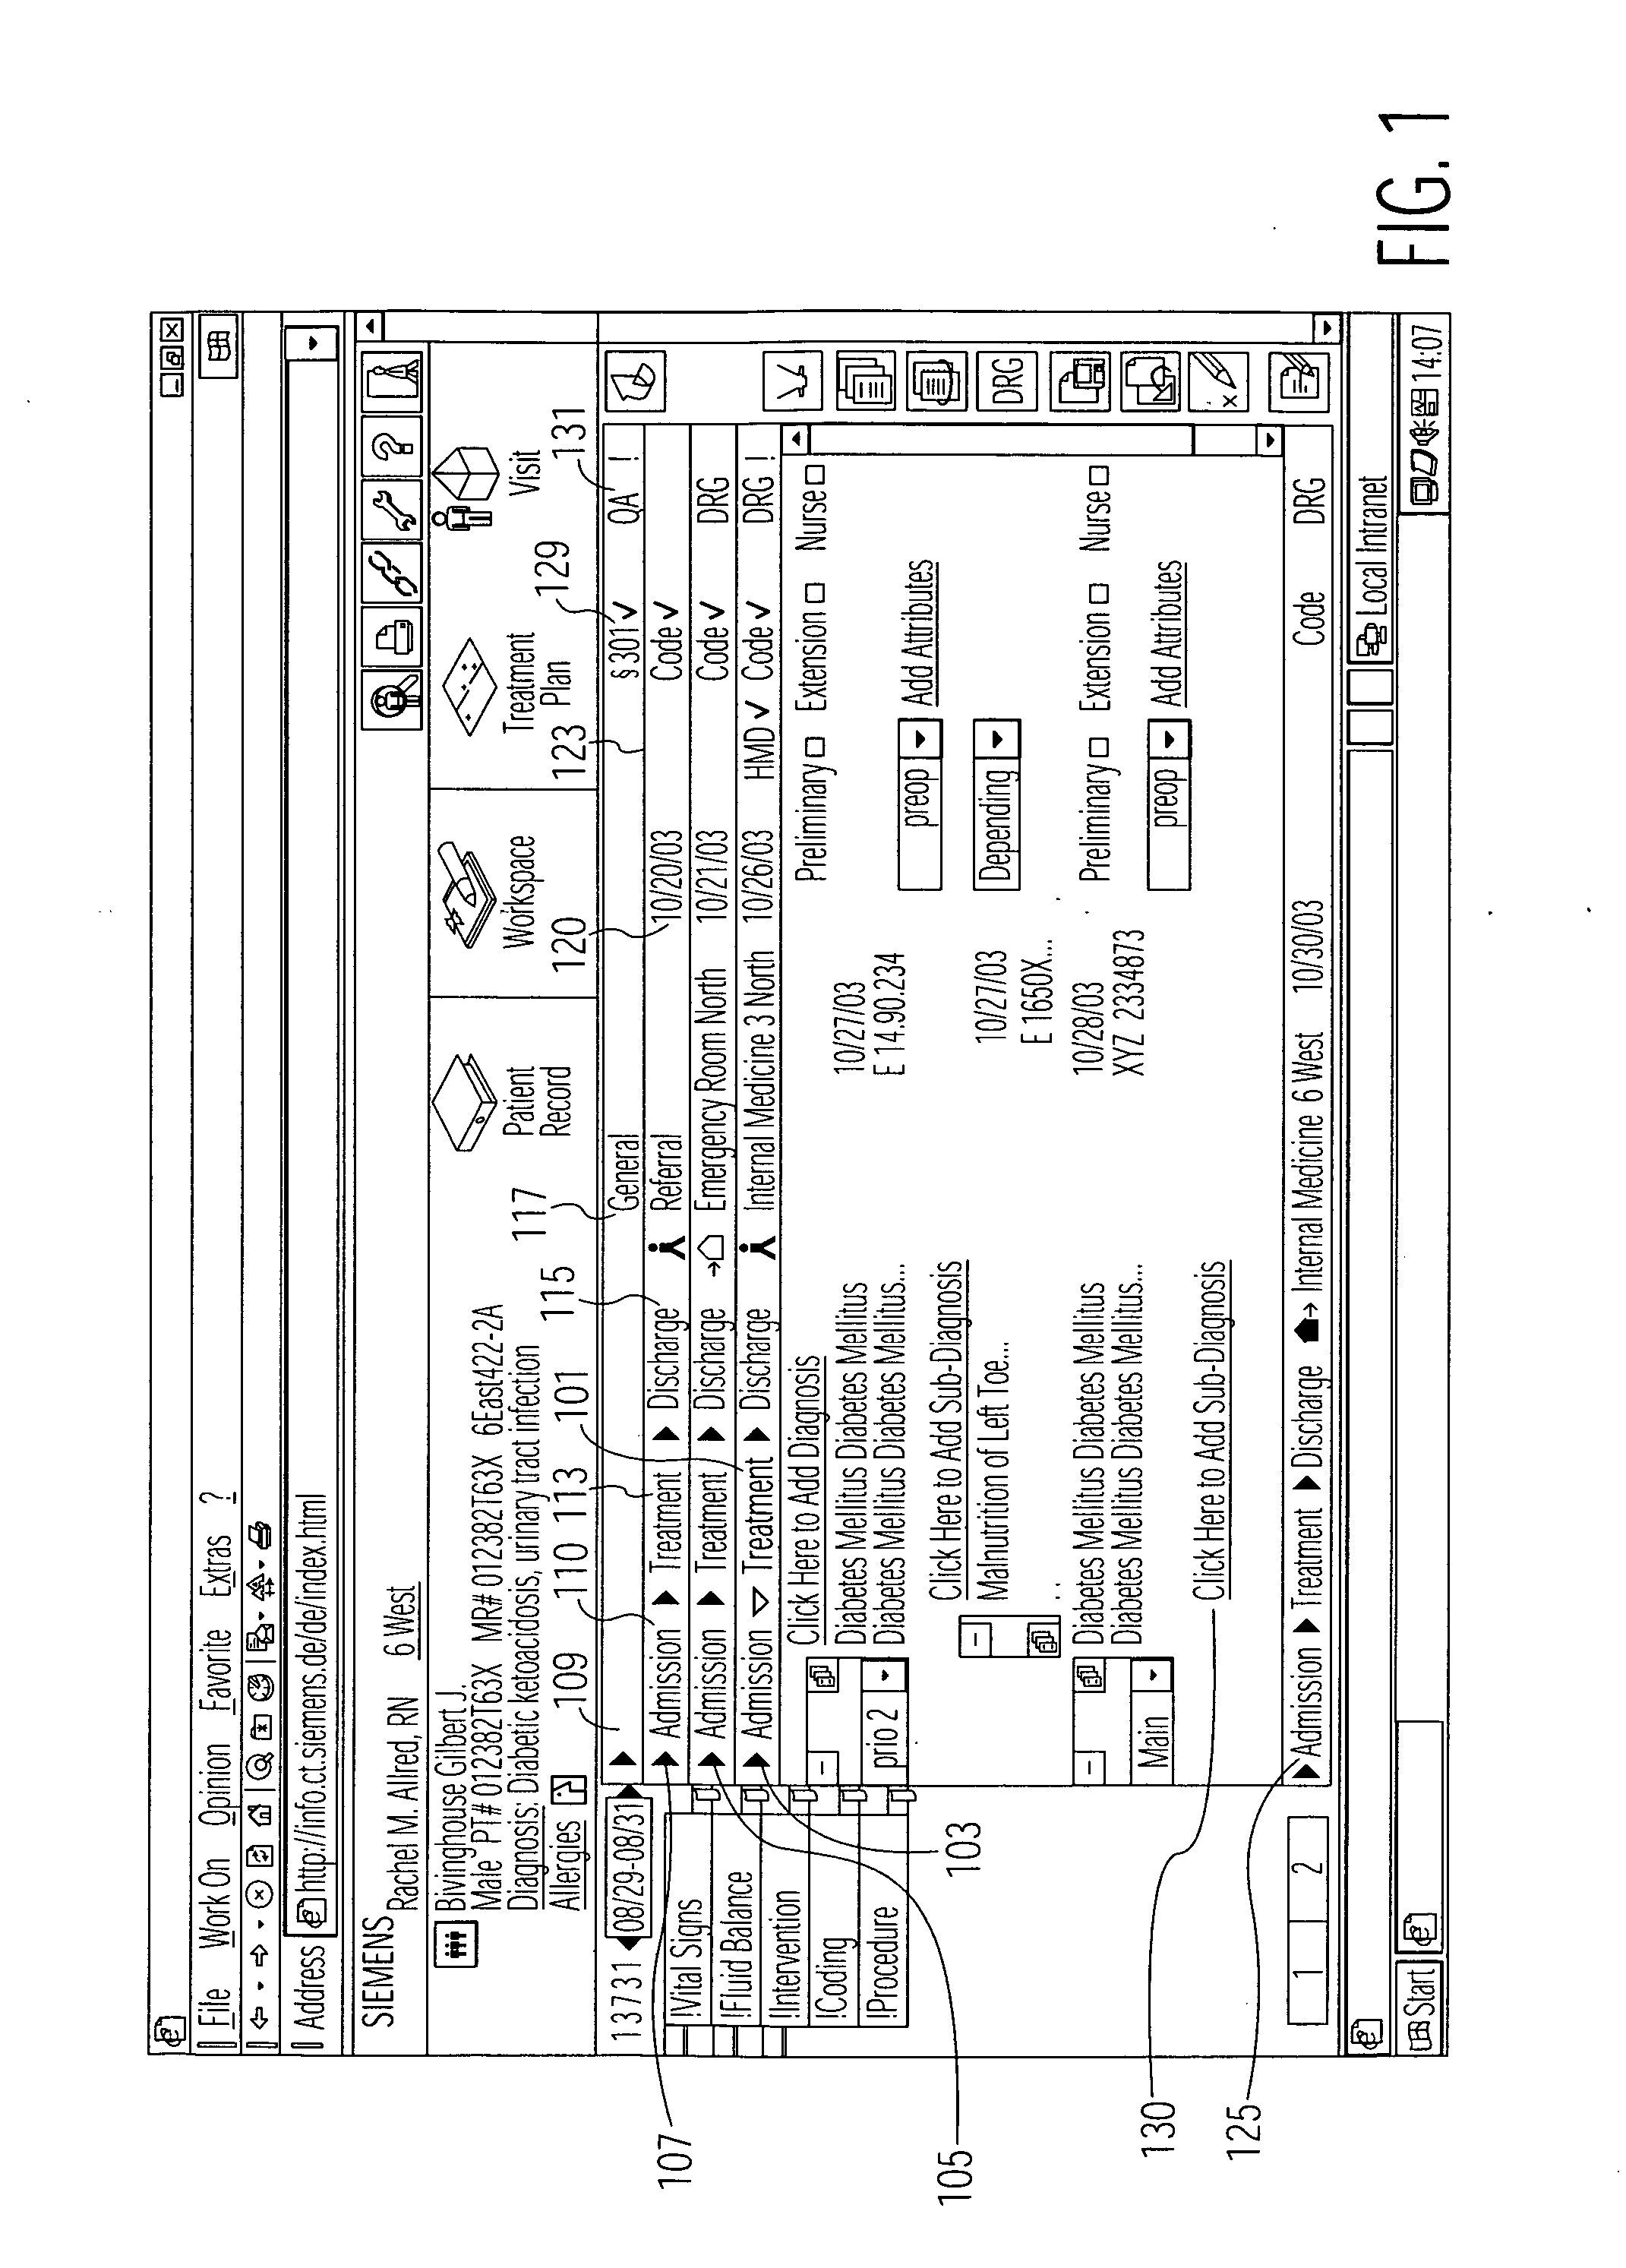 User interface display system